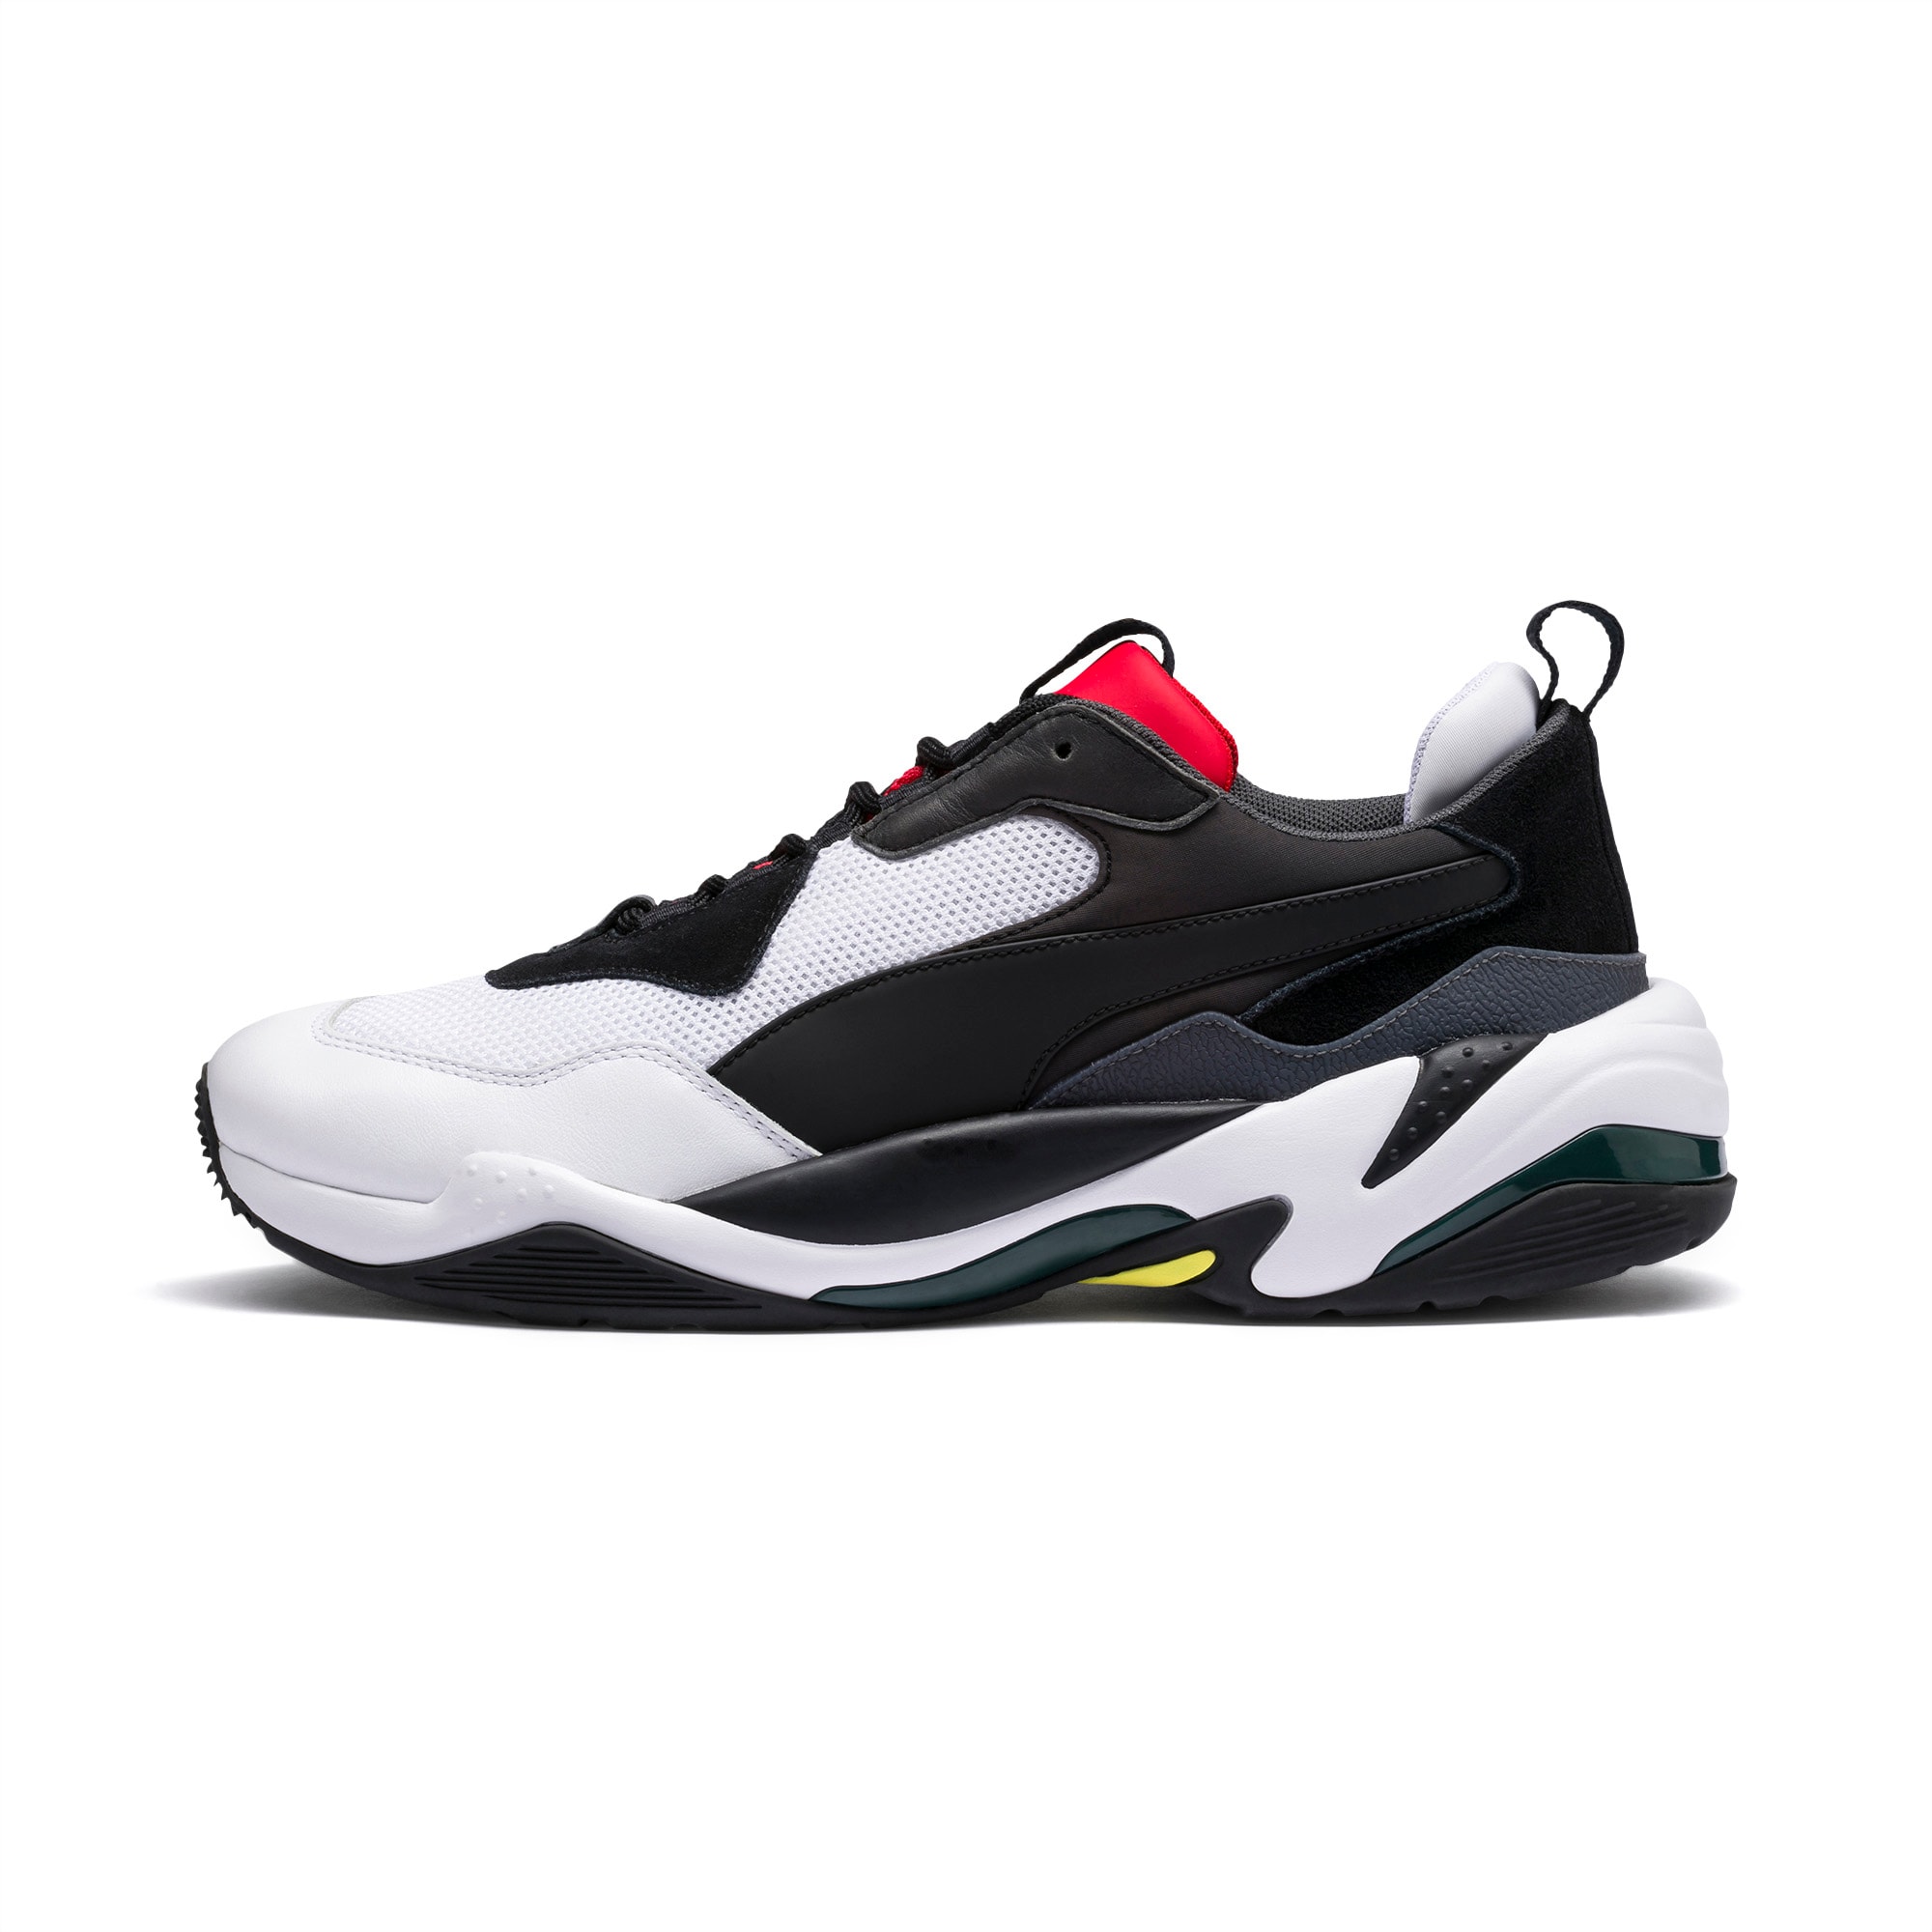 puma thunder spectra trainers